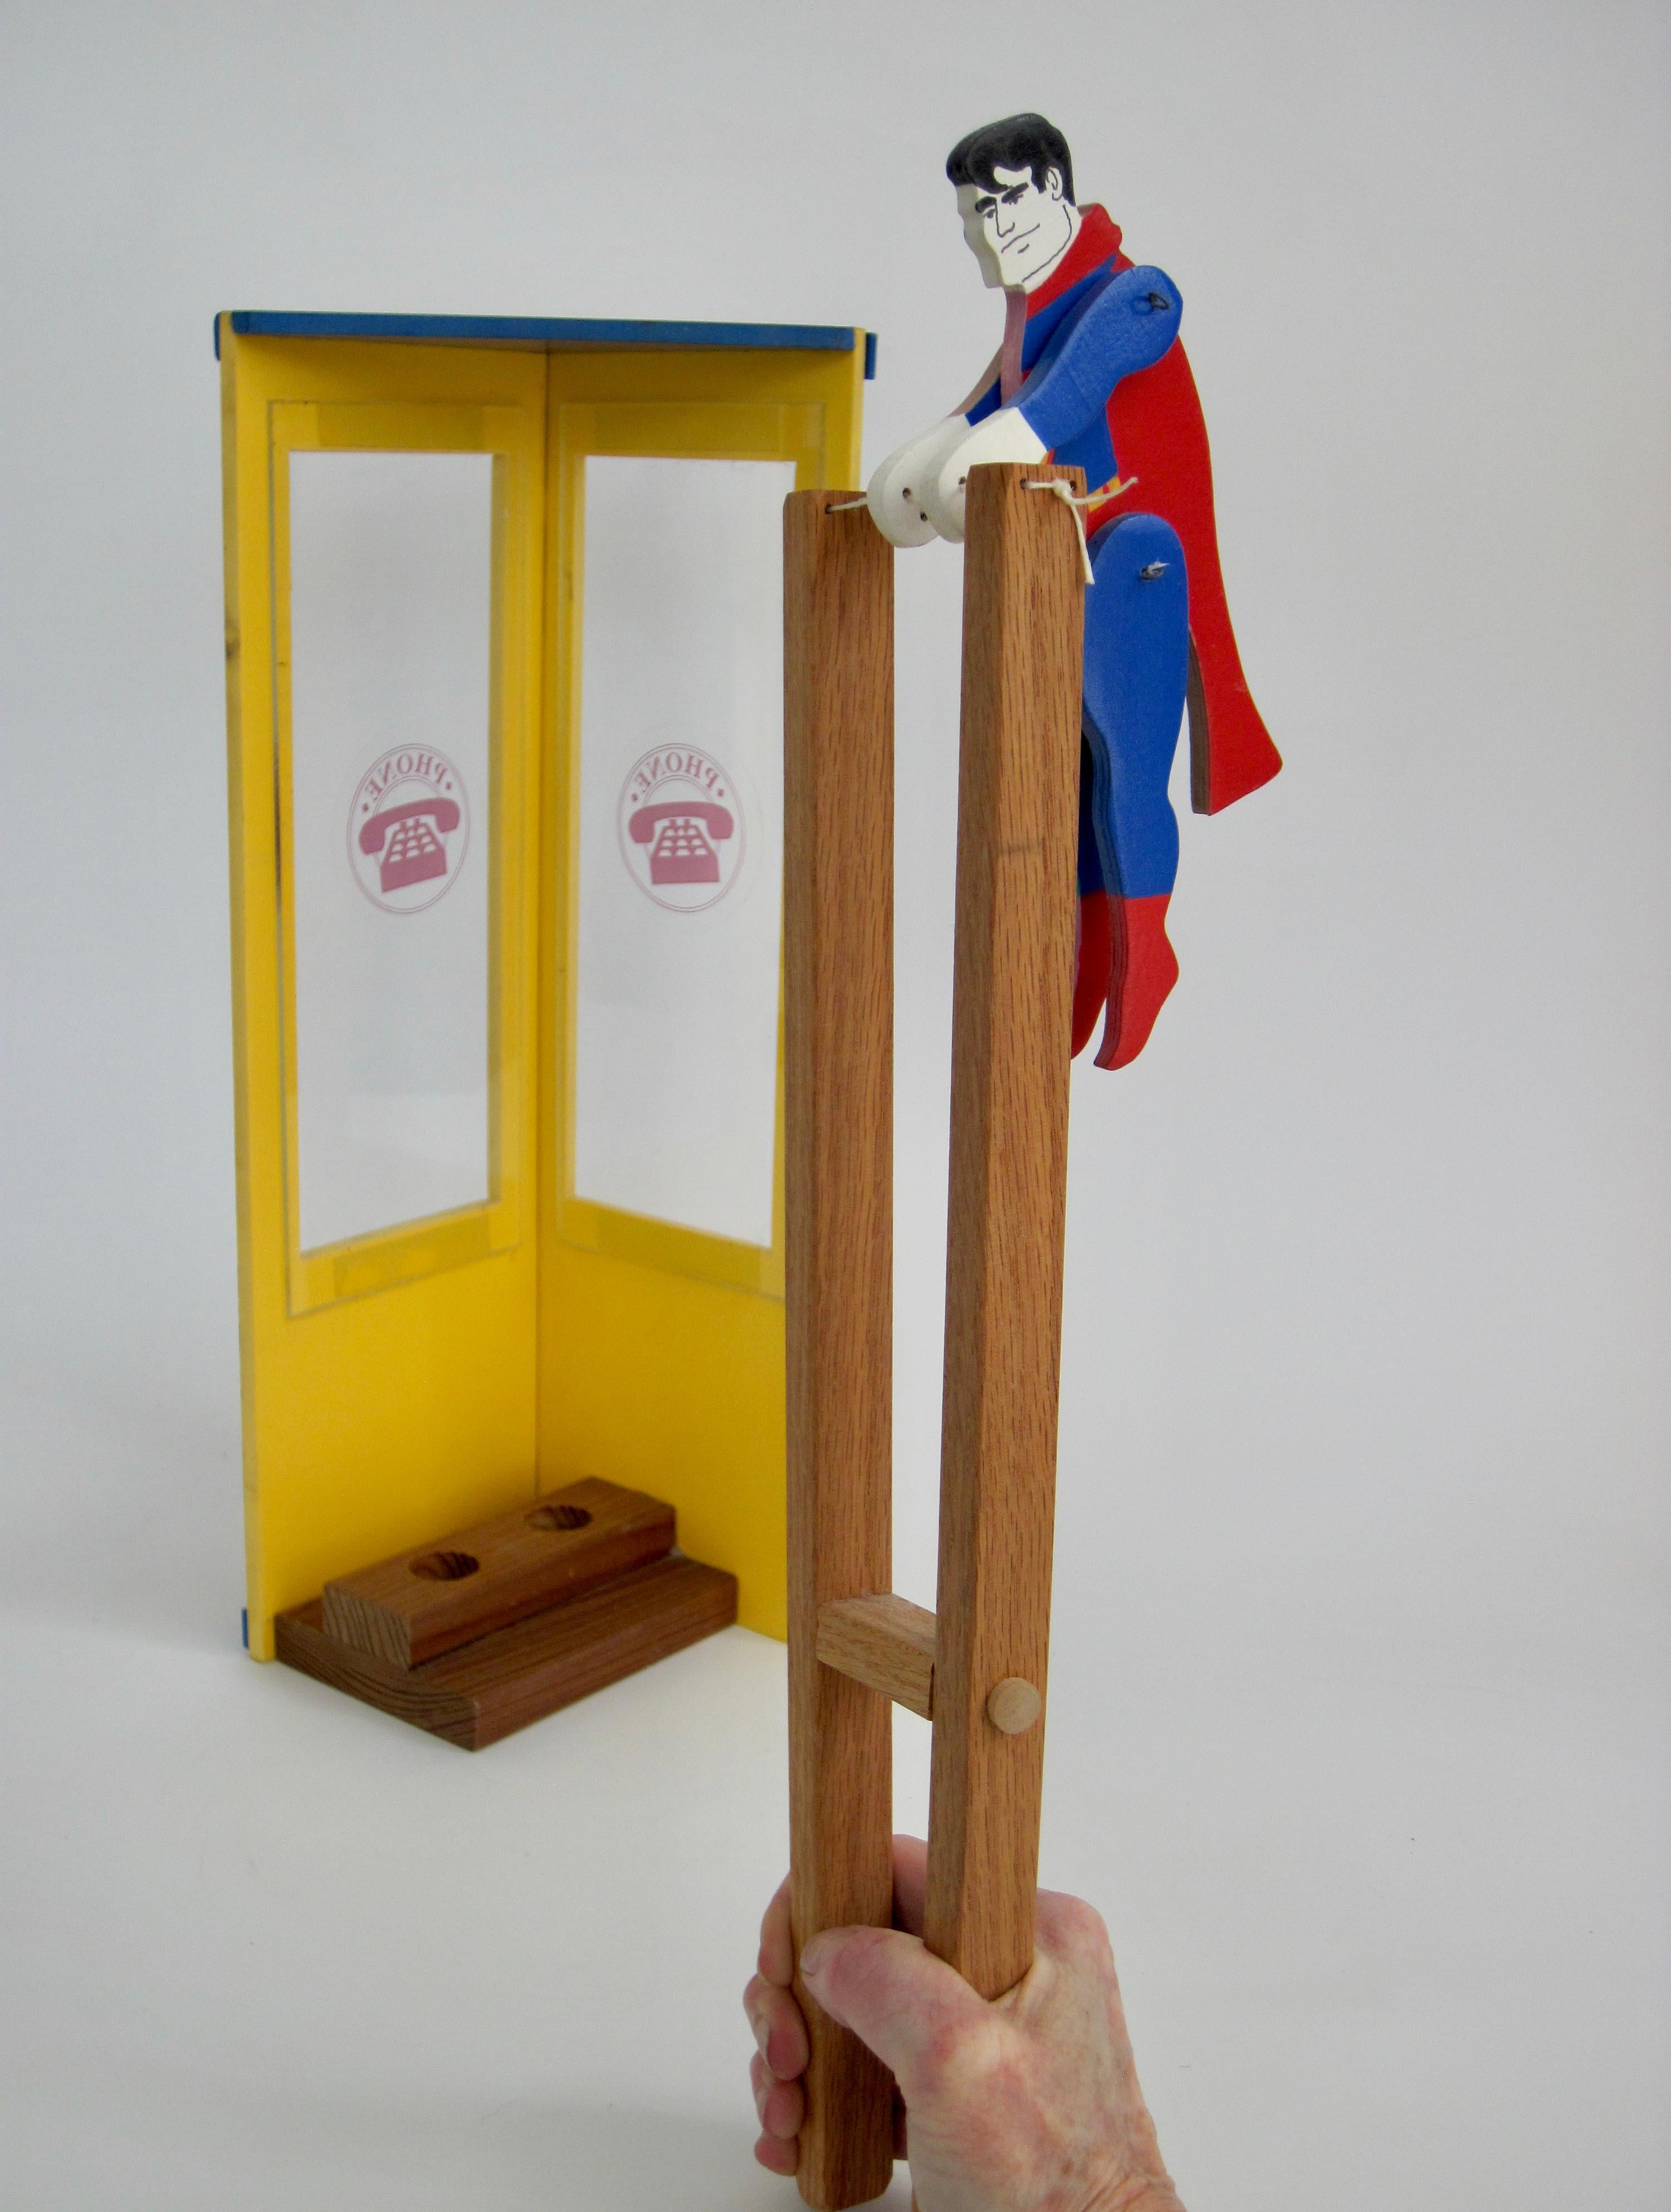 Superhero Superman on one side and Clark Kent on the other, wooden trapeze artist toy with graffiti phone booth holder. Squeeze the ends of this and he flips around.